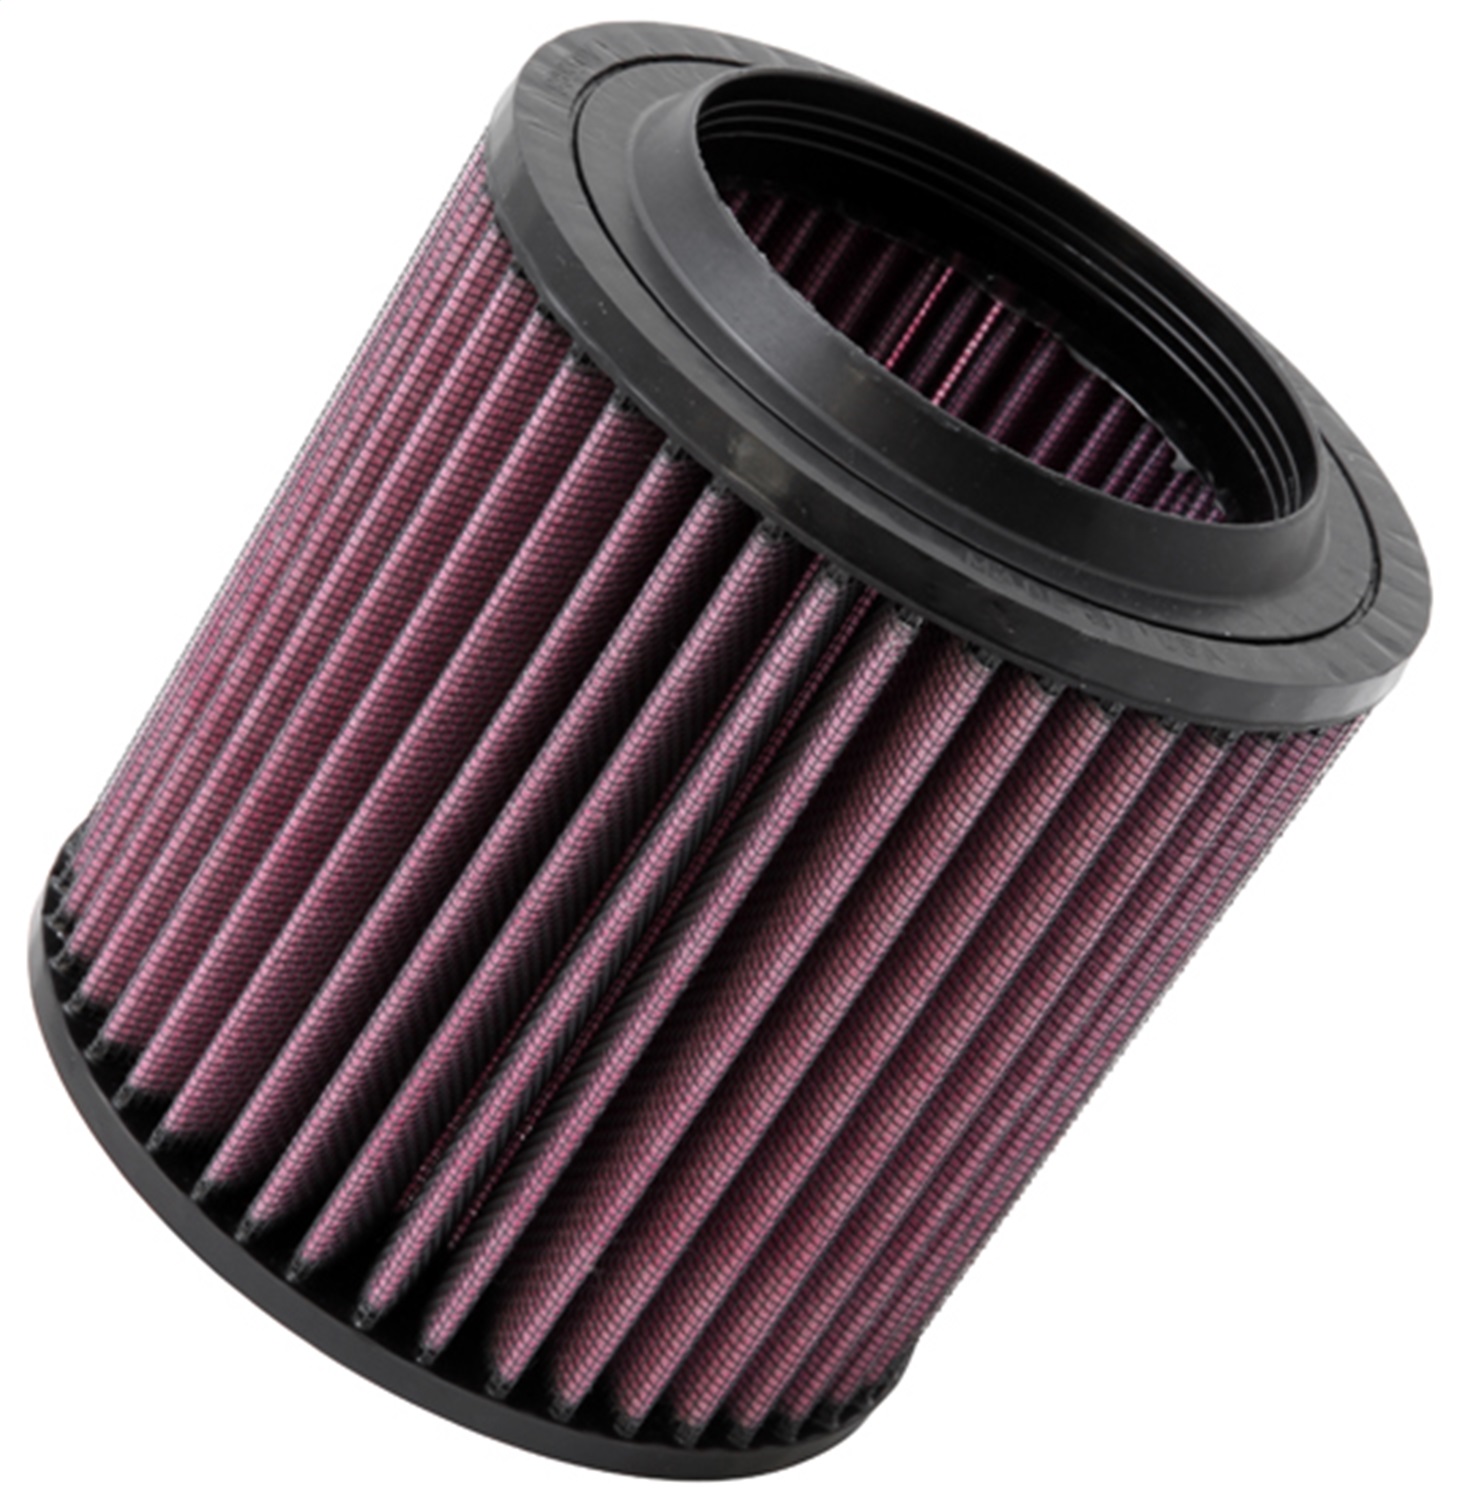 K&N Filters K&N Filters E-1992 Air Filter Fits 07-09 A8 Quattro S8